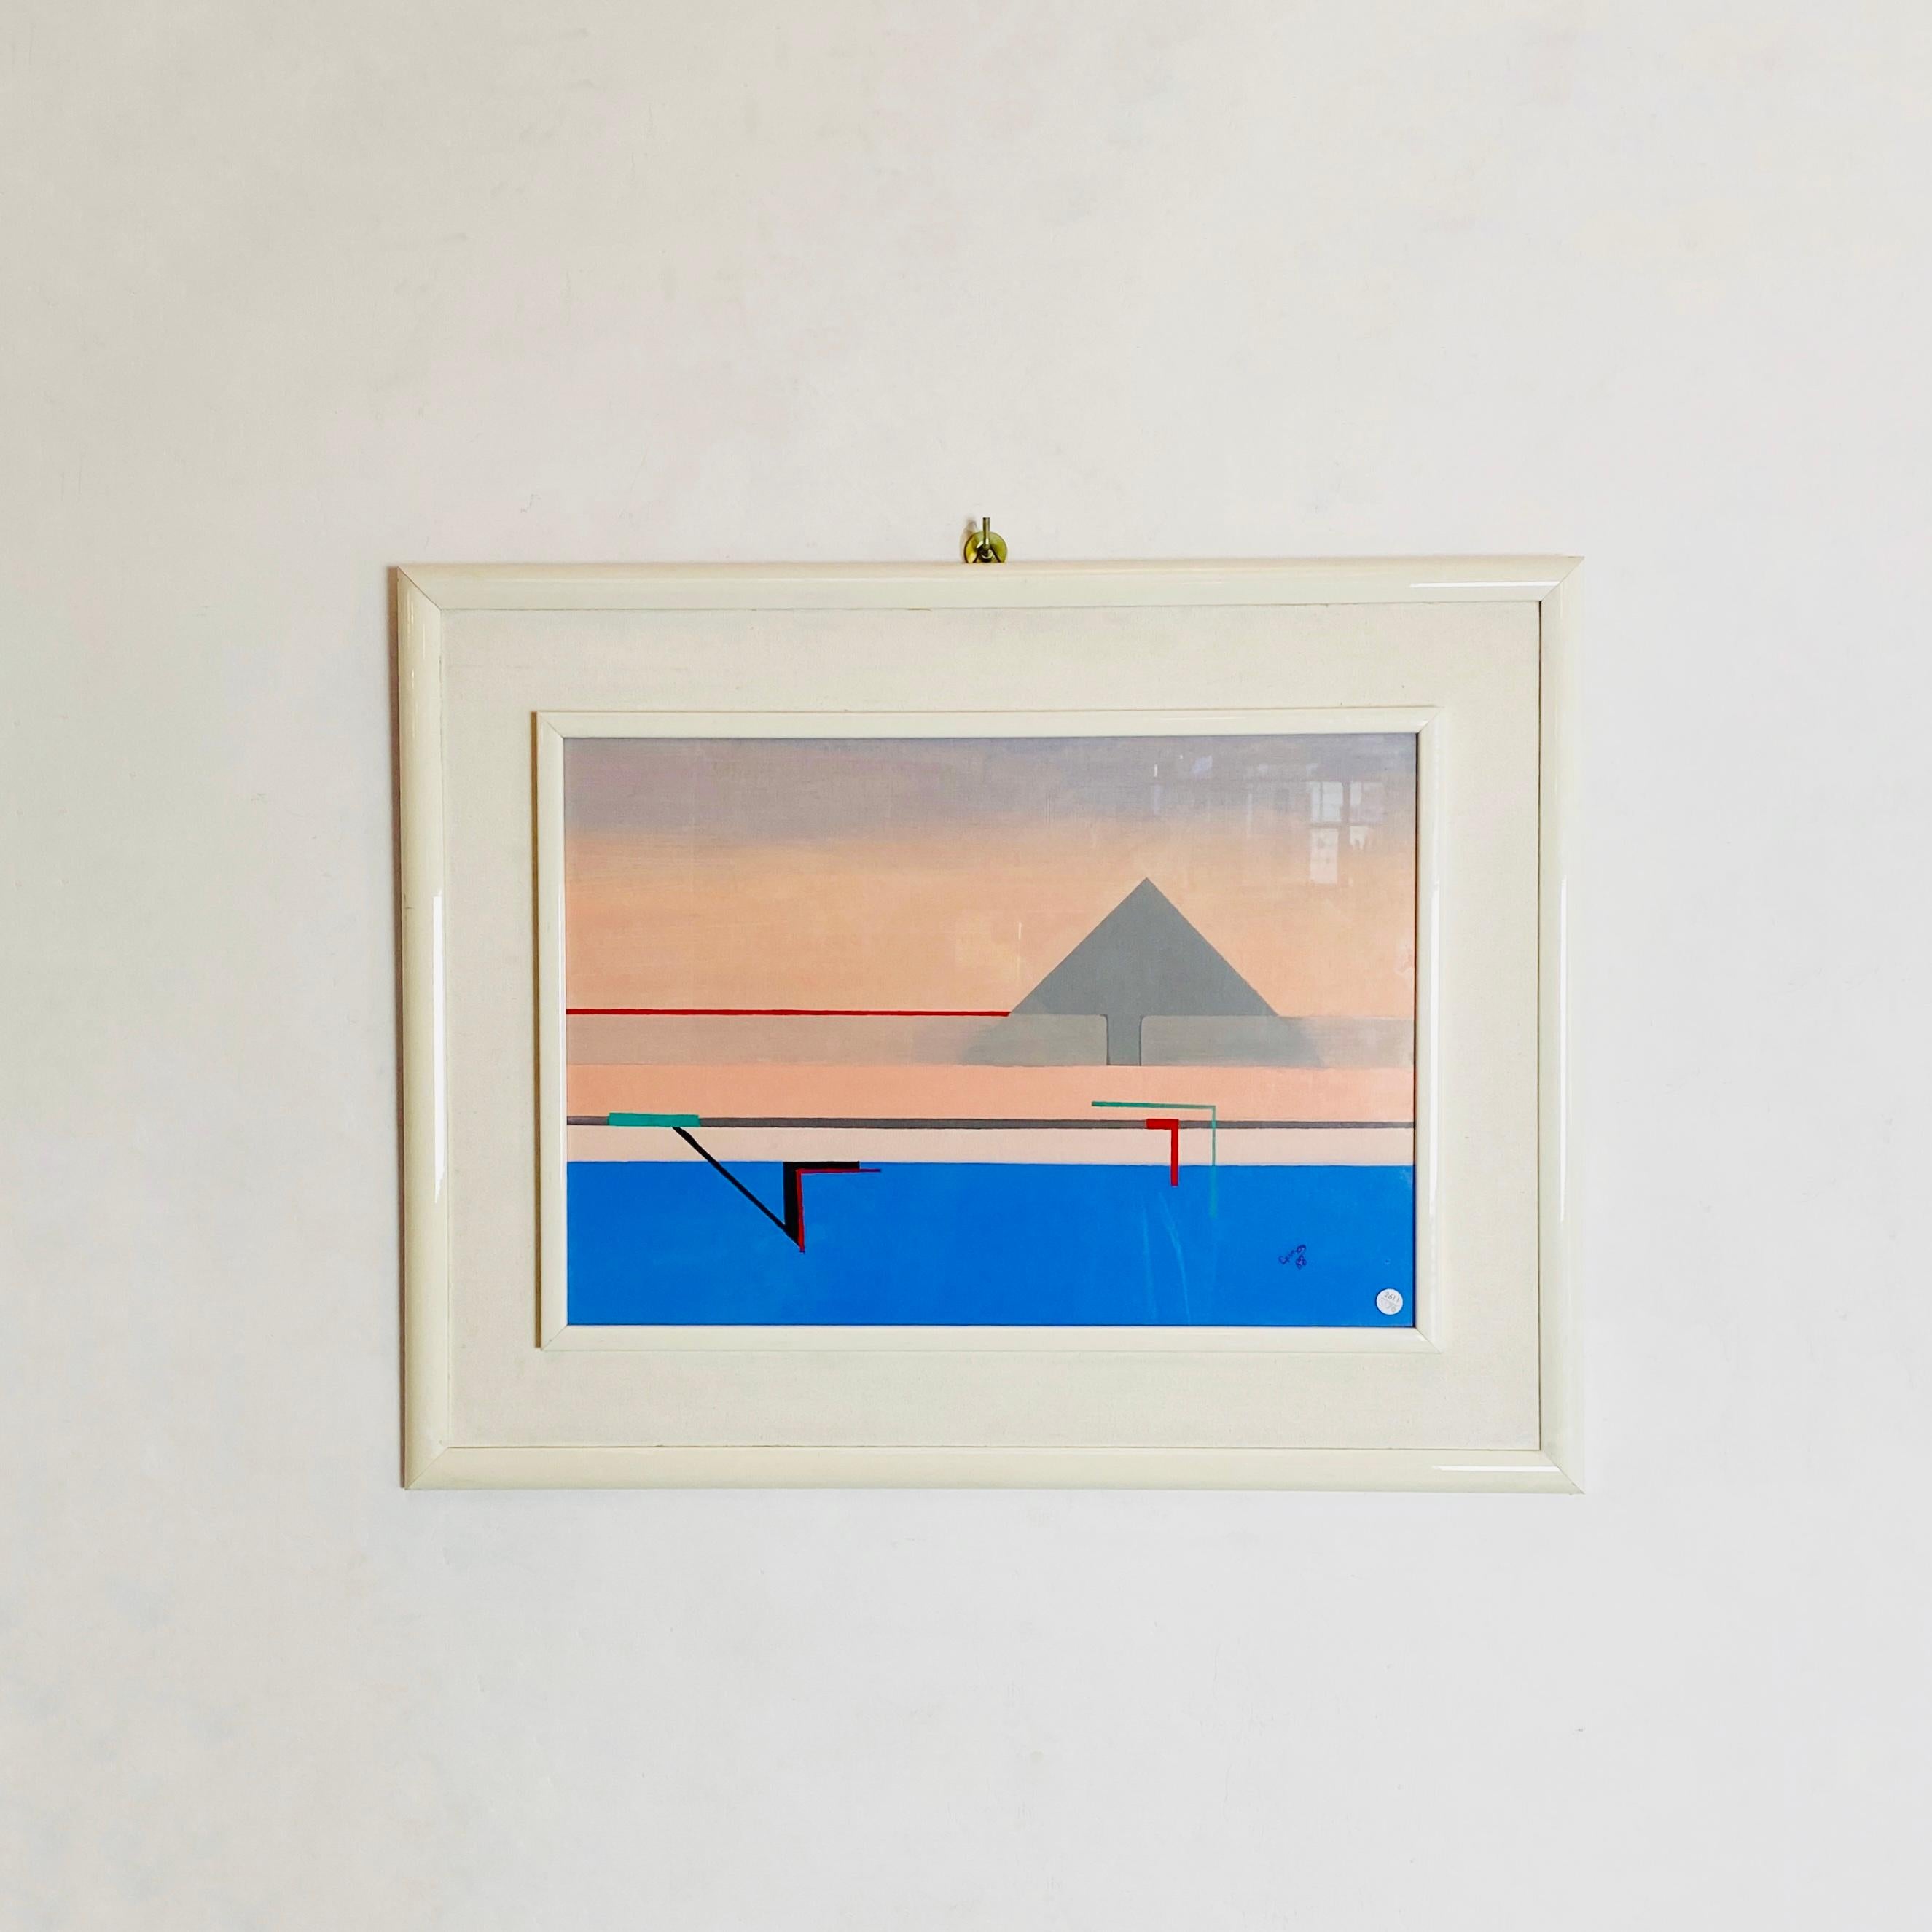 Italian Mid-Century Modern Painting with geometric representation, 1988
Painting with geometric representation, with wooden frame, passe-partout in fabric and the author's signature in the lower left part.
Signed Gino, 1988.

Good